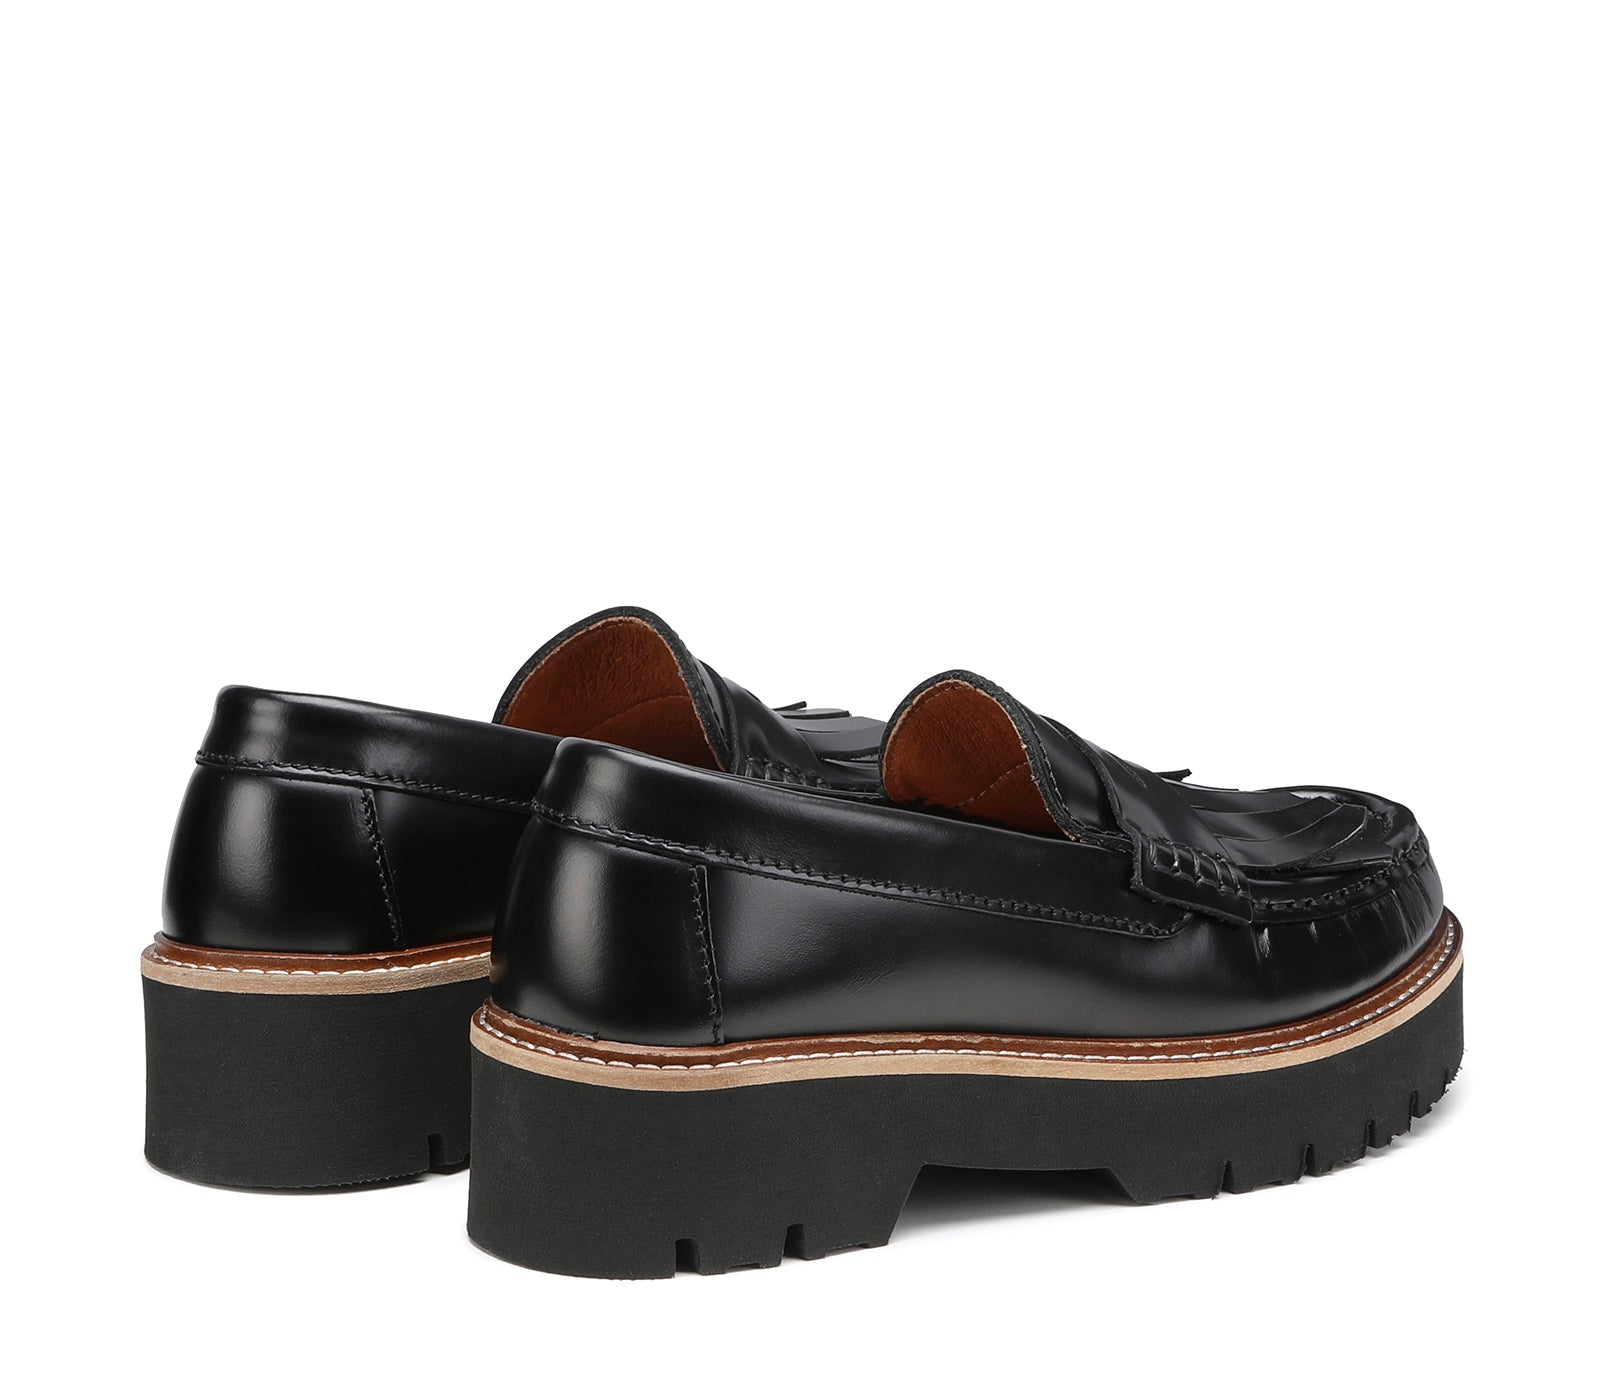 Women's Black Patent Leather Loafer with Voluminous Sole